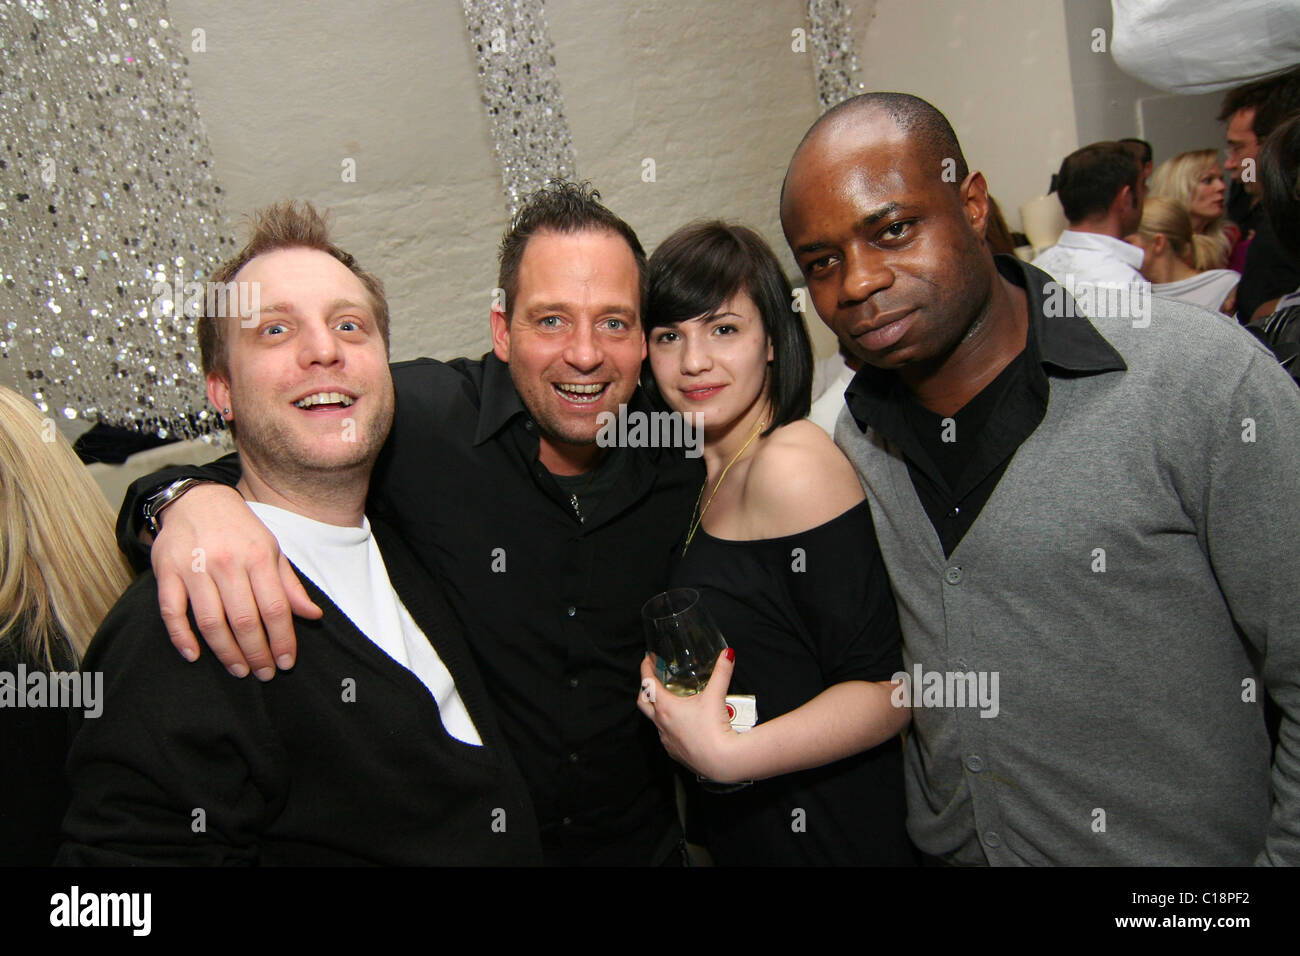 Tom Novy and guests 6th anniversary party of restaurant Nektar Munich, Germany - 11.03.09 Stock Photo